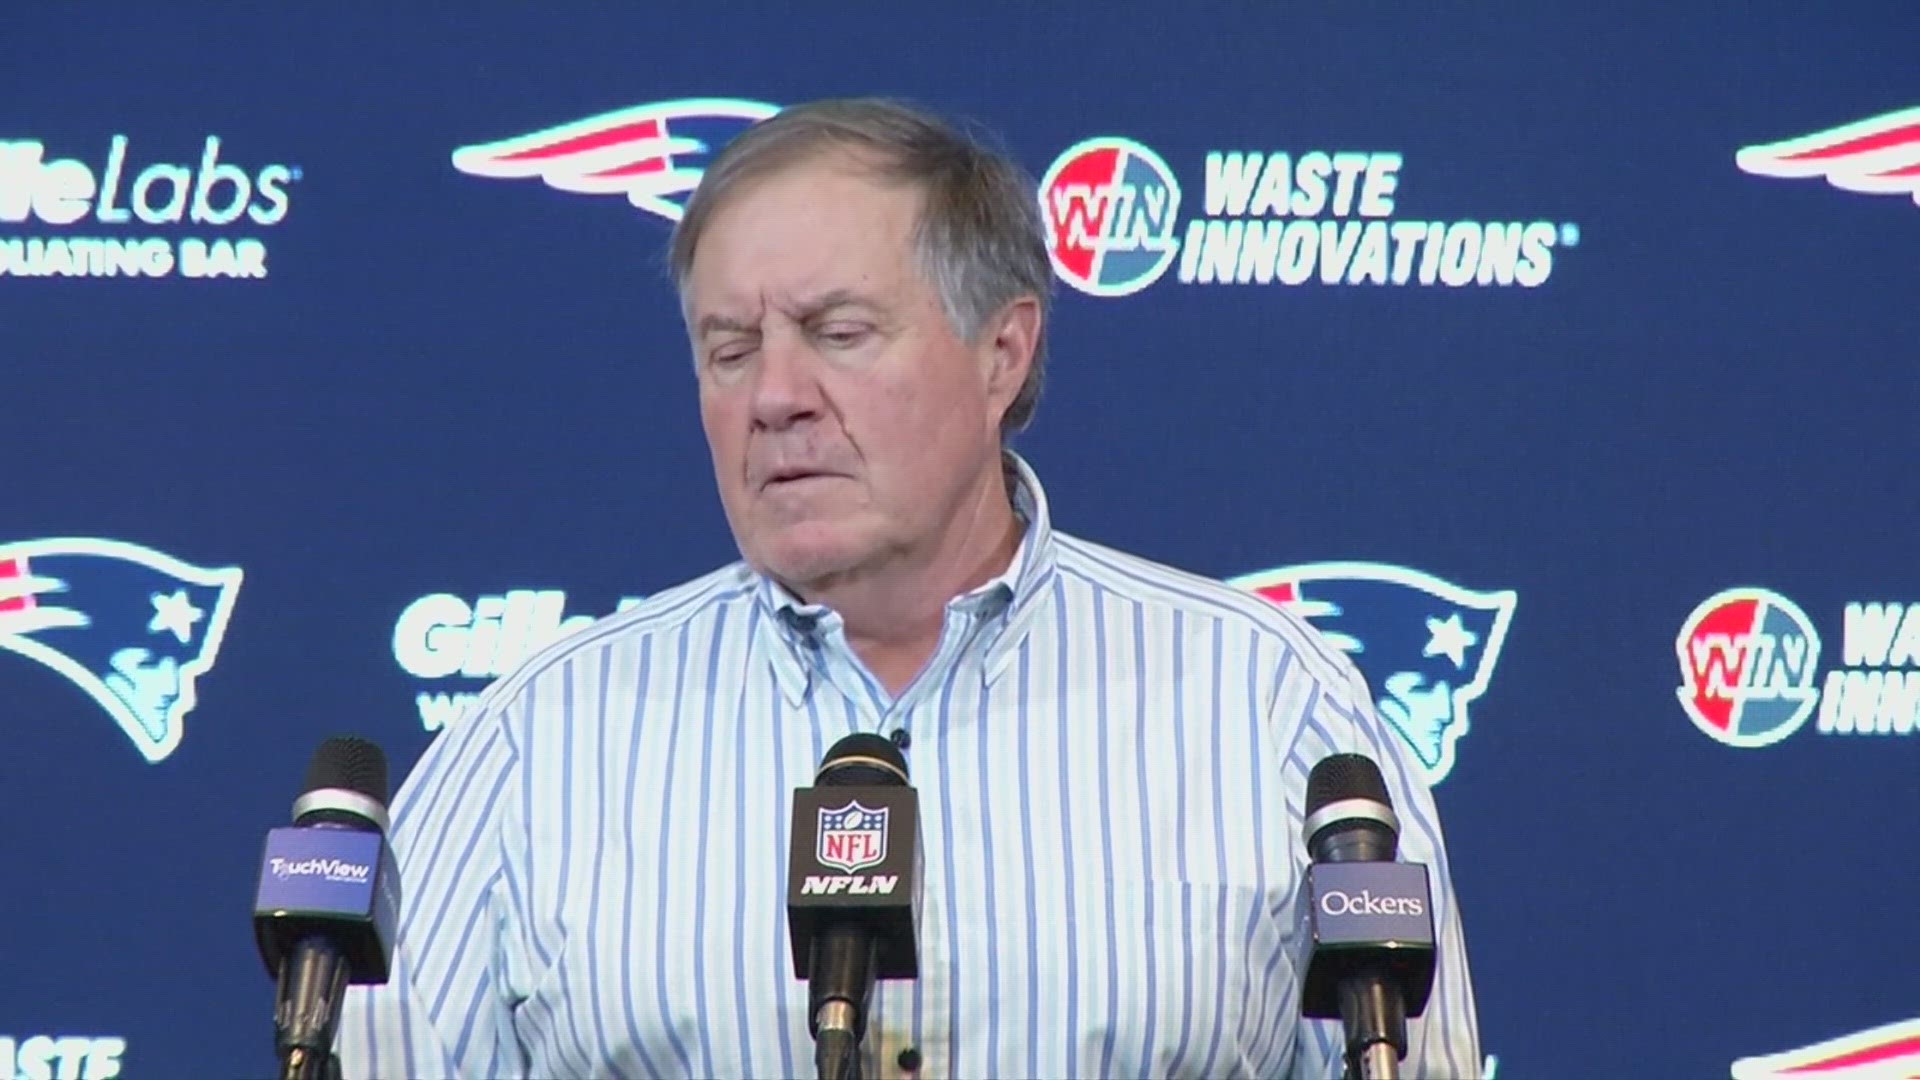 Belichick led the Patriots to six Super Bowl titles in his tenure.